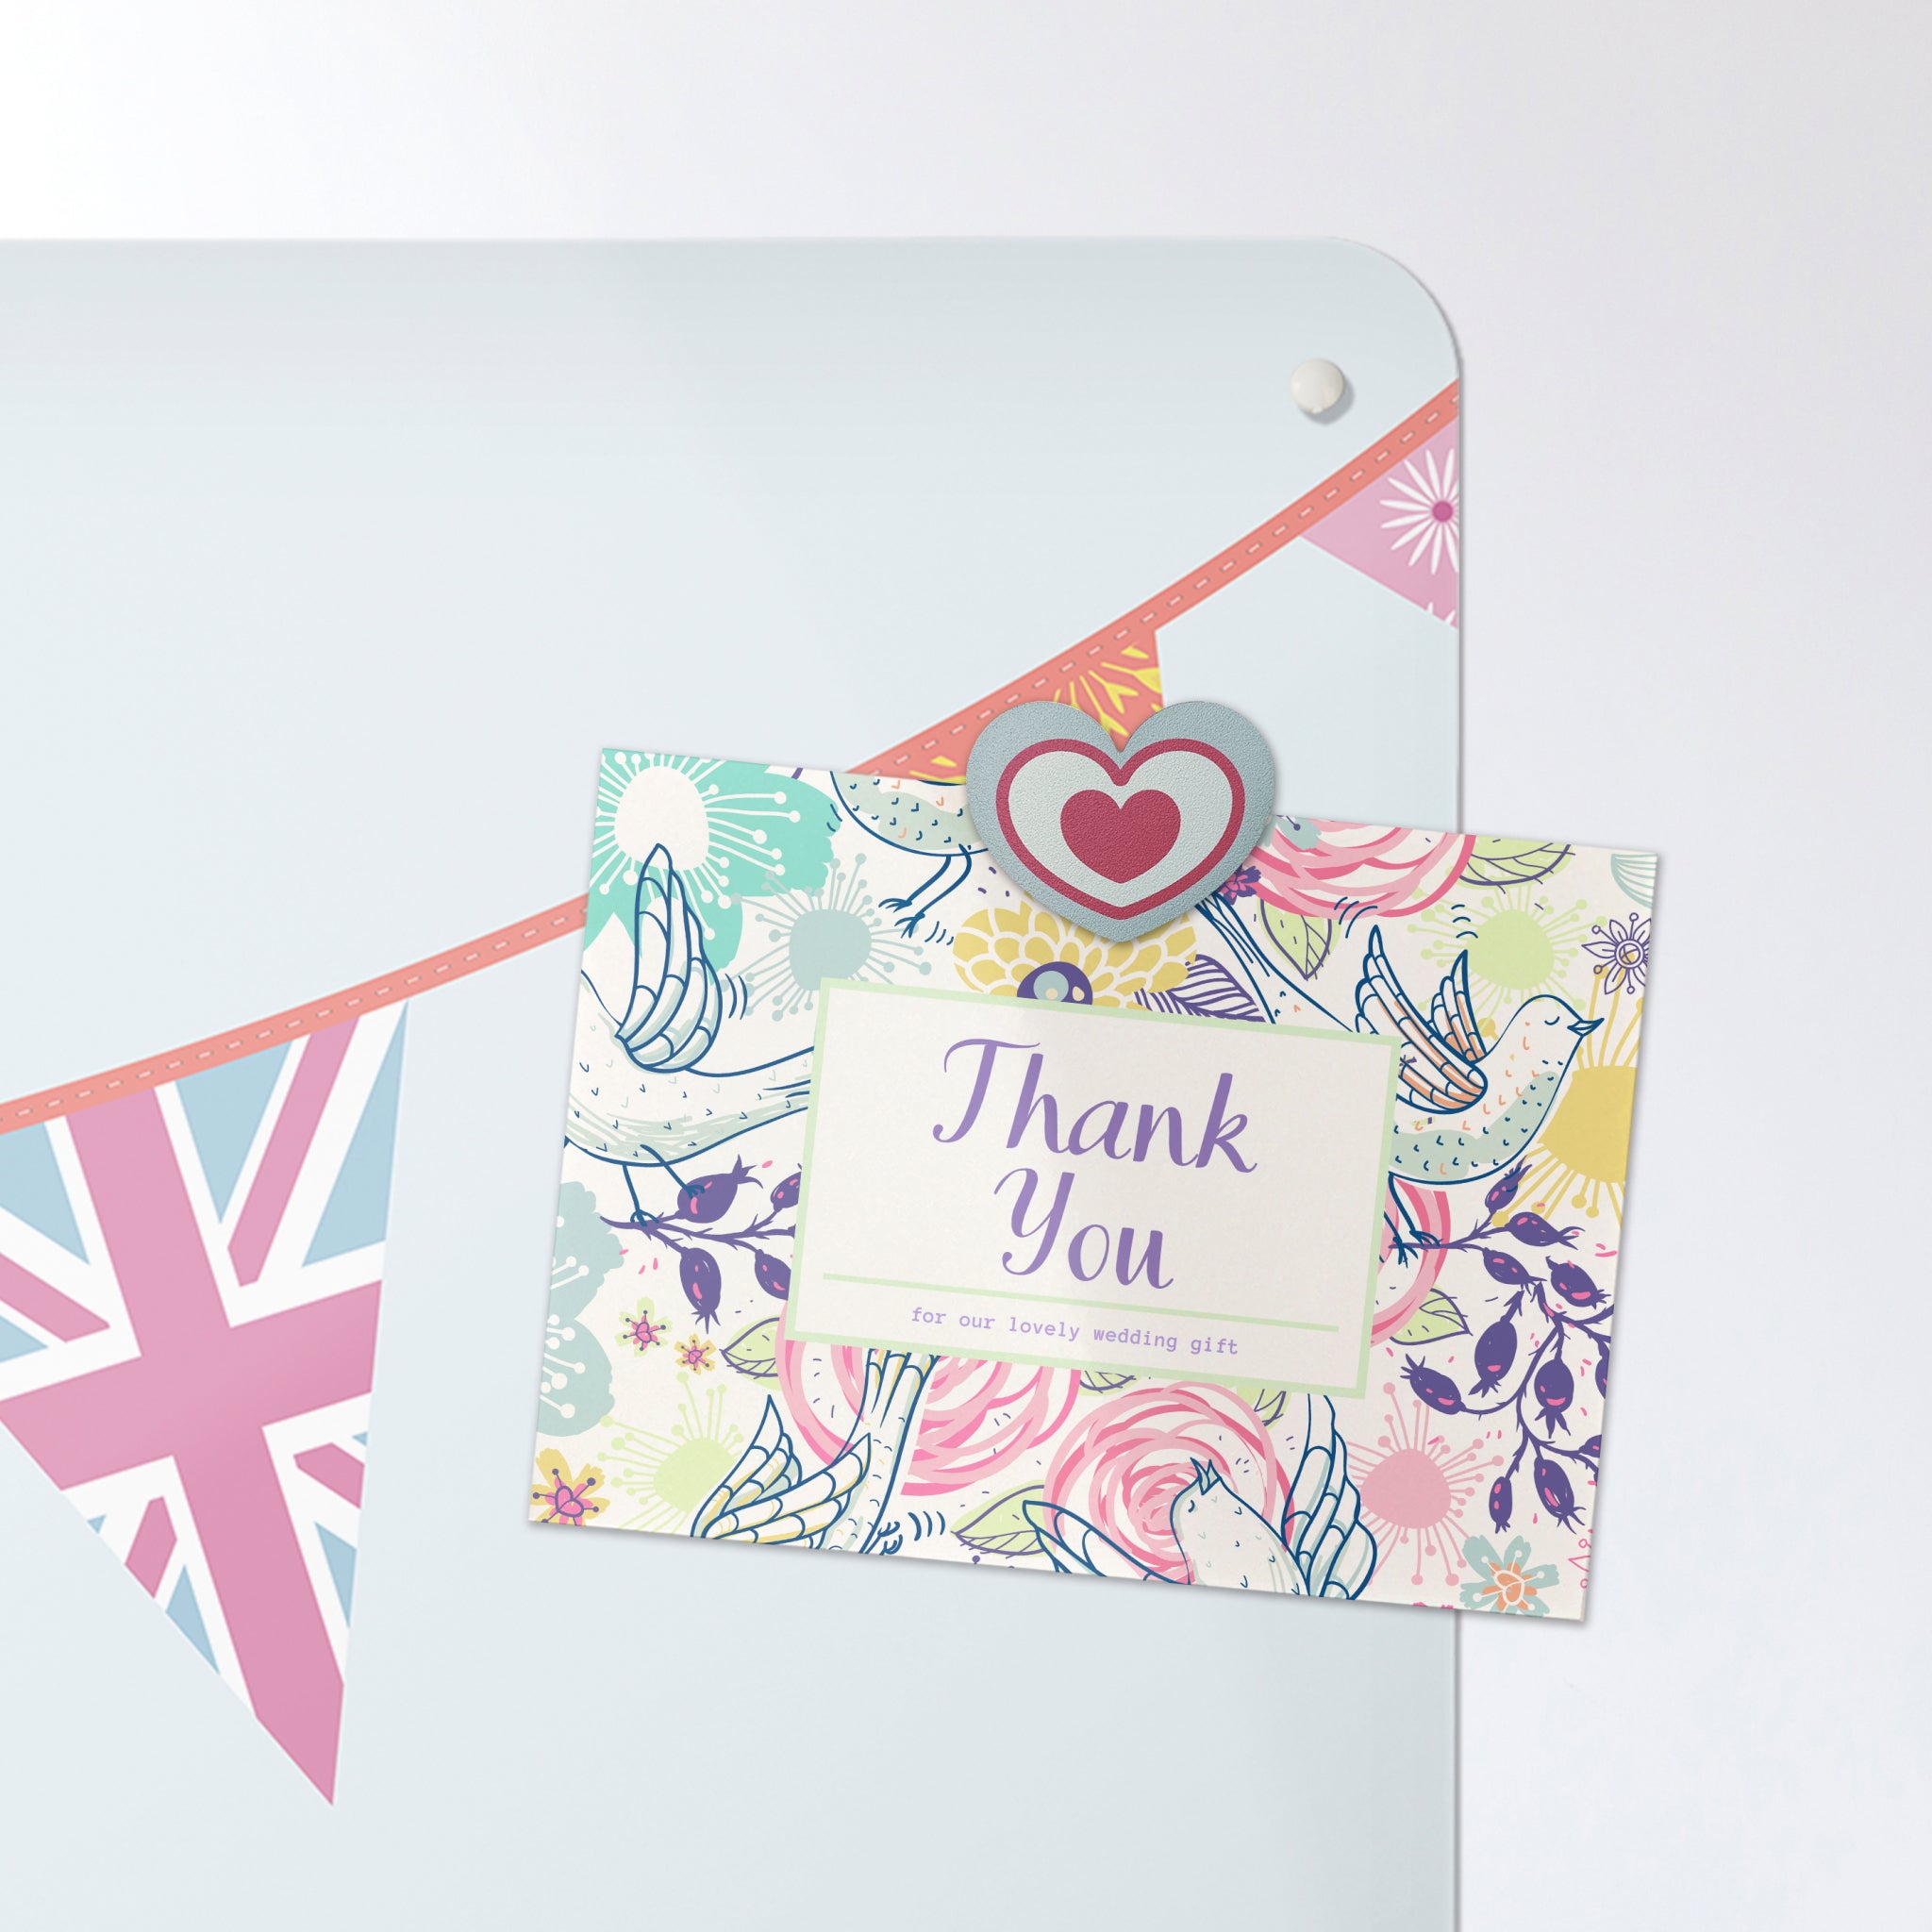 A postcard on a bunting design magnetic board or metal wall art panel